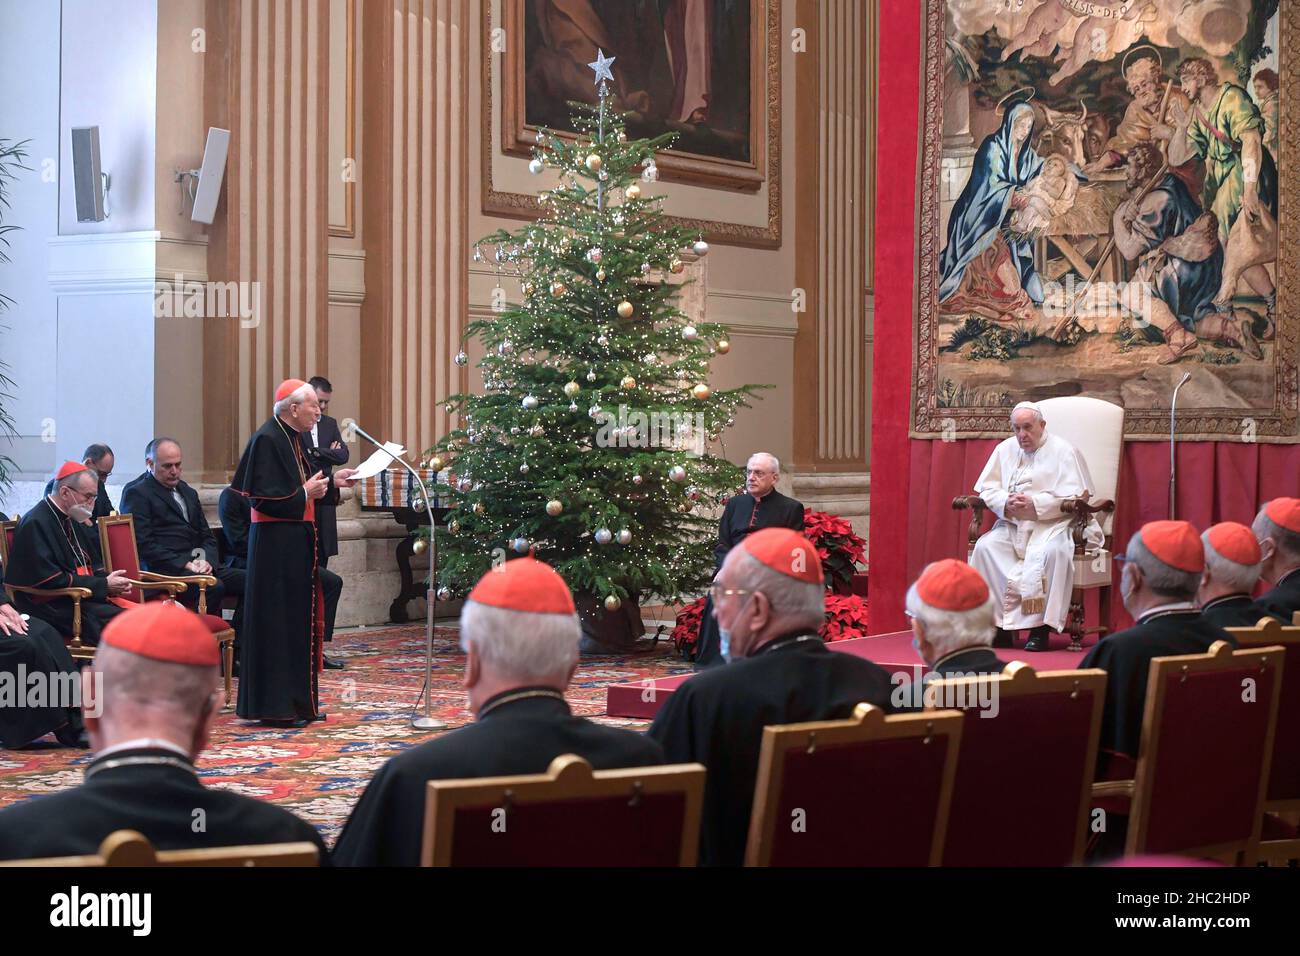 Vatican City, Italy. 23rd Dec, 2021. Pope Francis attending an audience for the annual exchange of Christmas greetings with the members of the Roman Curia in the Vatican.on December 23, 2021 RESTRICTED TO EDITORIAL USE - Vatican Media/Spaziani. Credit: dpa/Alamy Live News Stock Photo